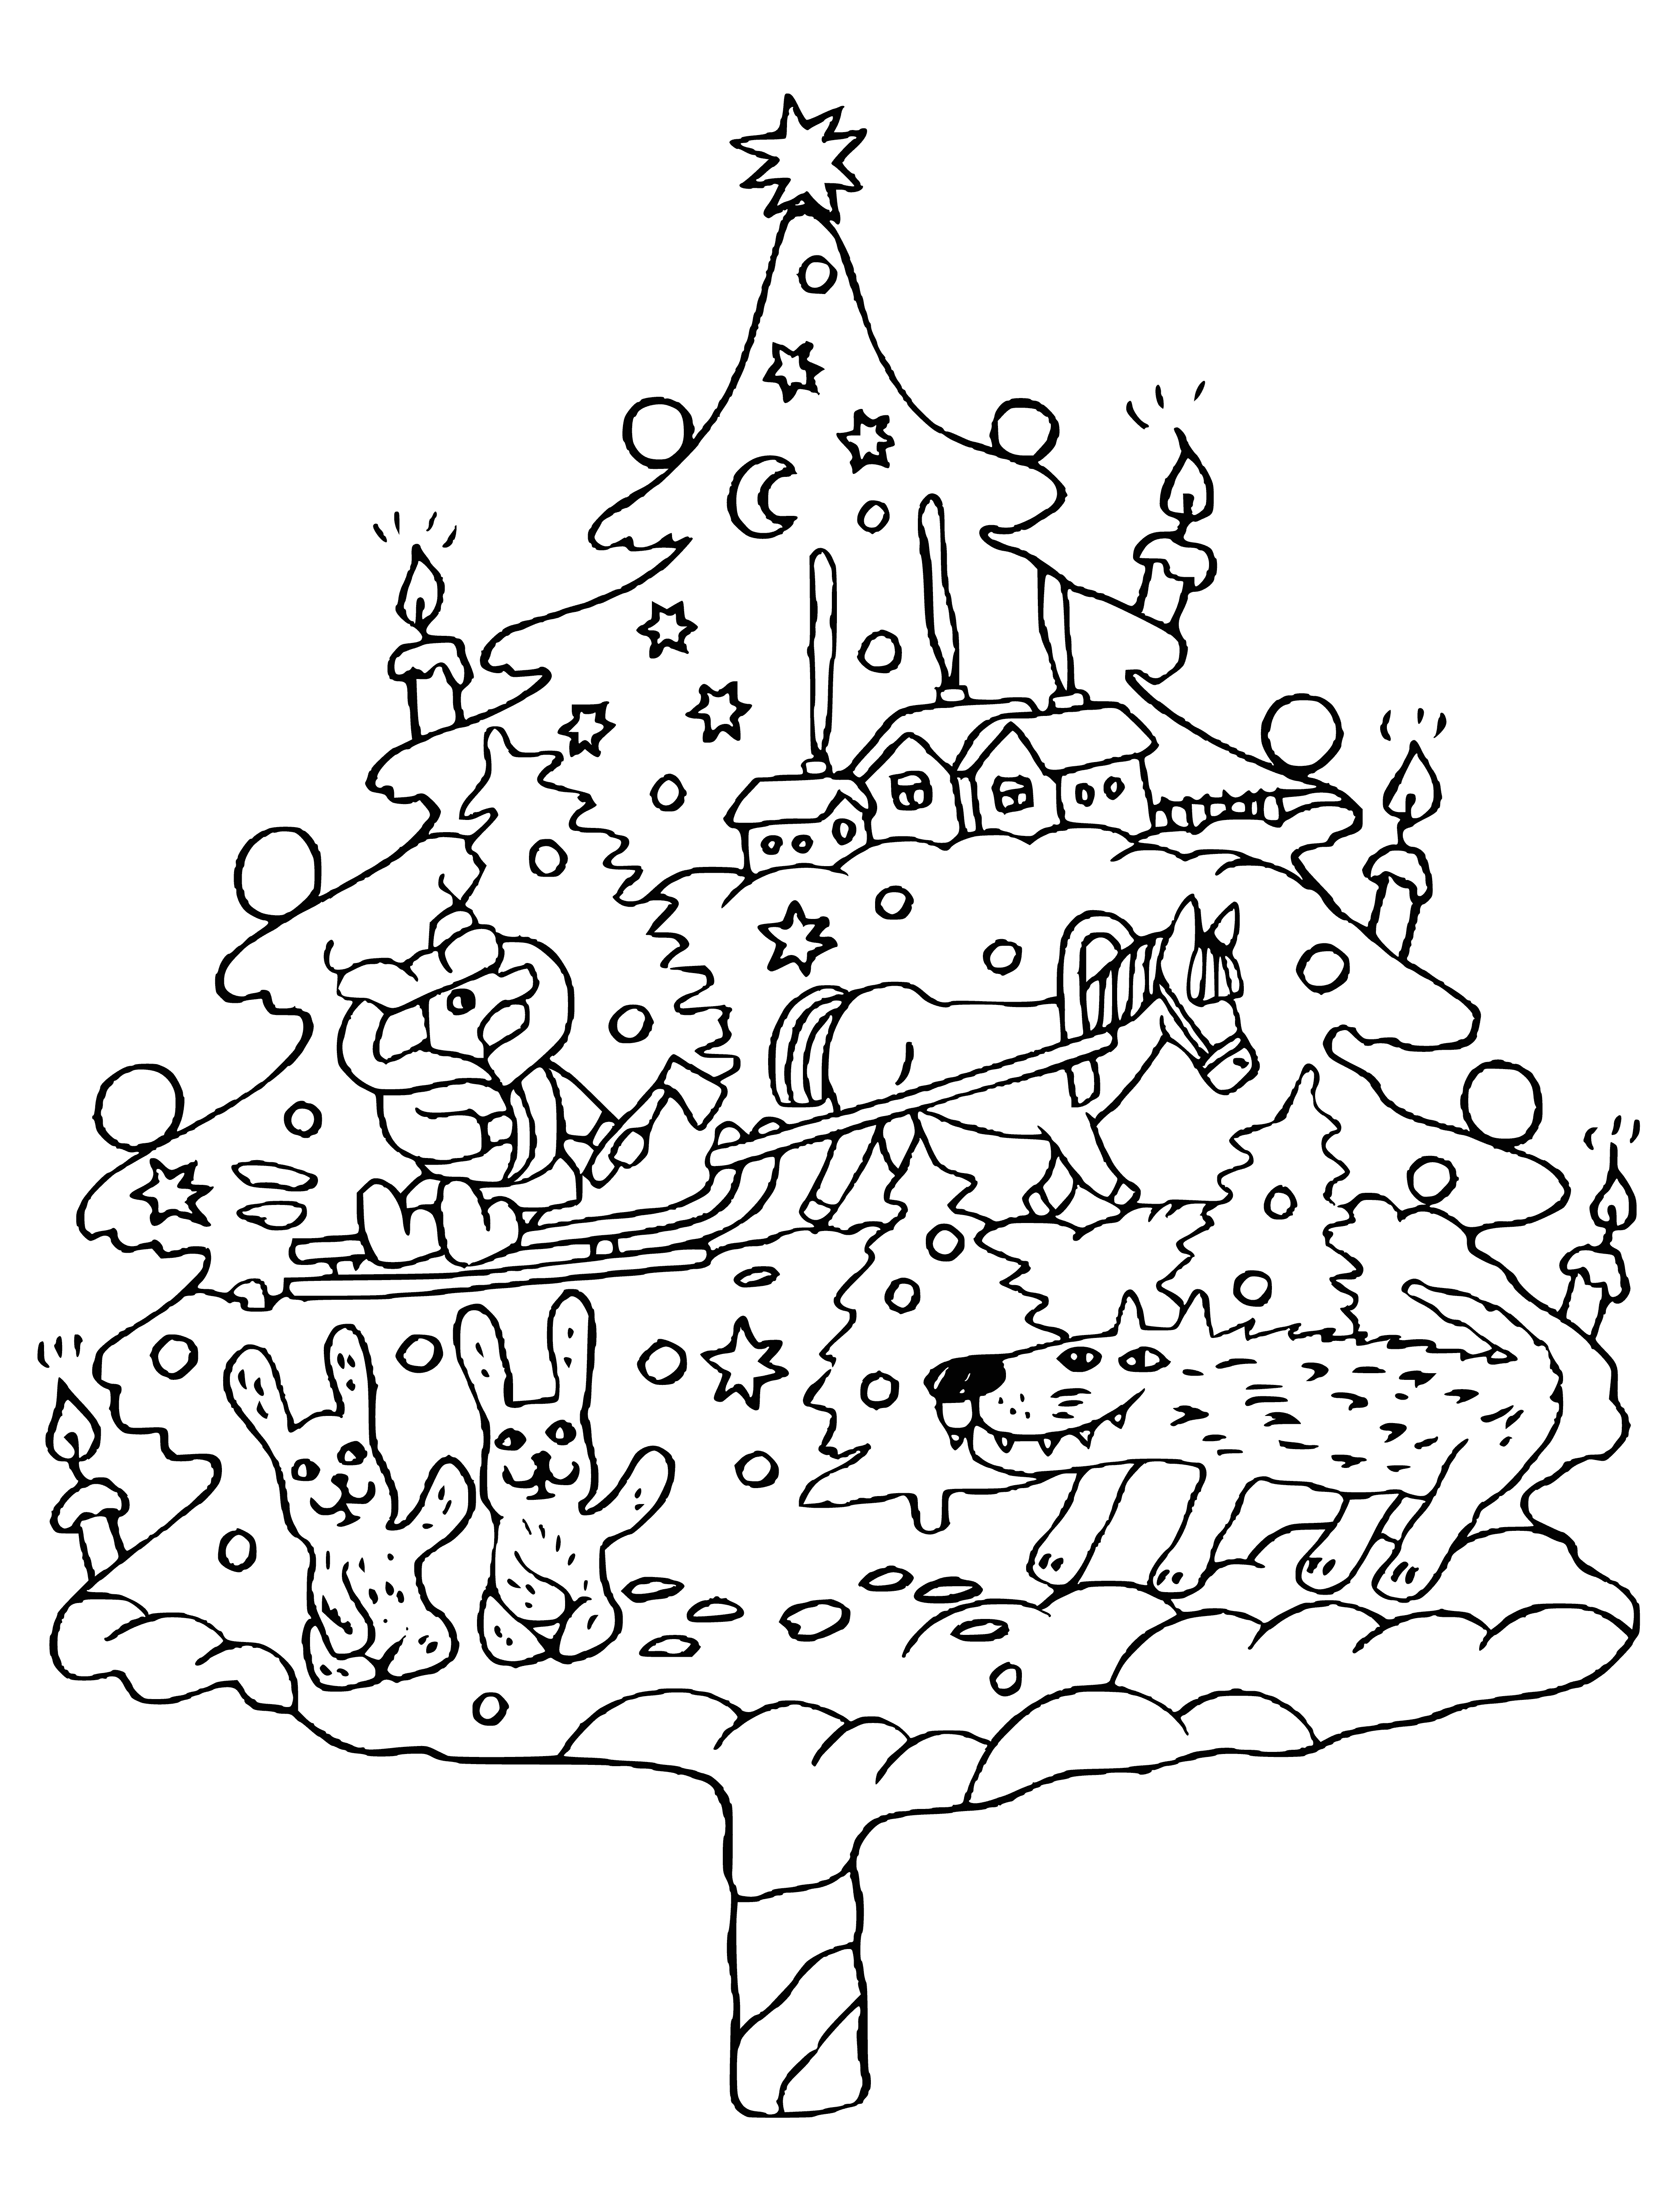 coloring page: A Christmas tree with a blue trunk and red leaves stands out from the others!